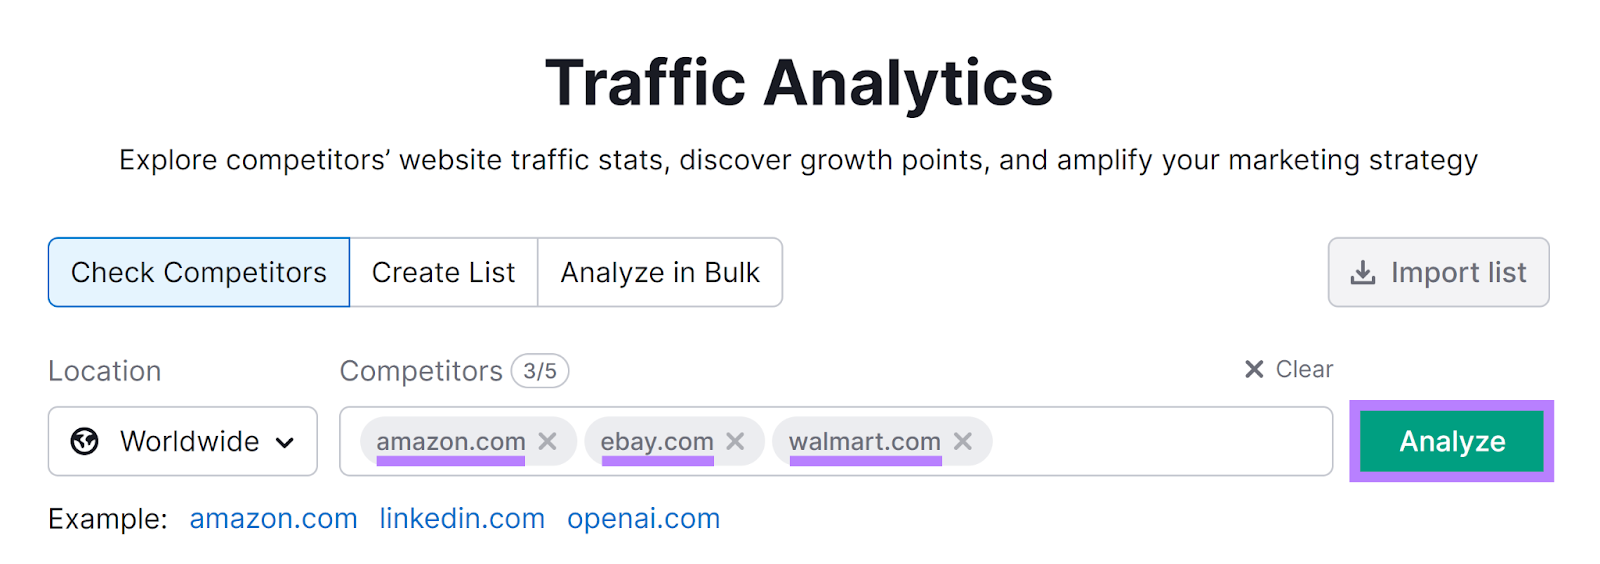 Semrush Traffic Analytics tool start with competitor domains entered and 'Analyze' button highlighted